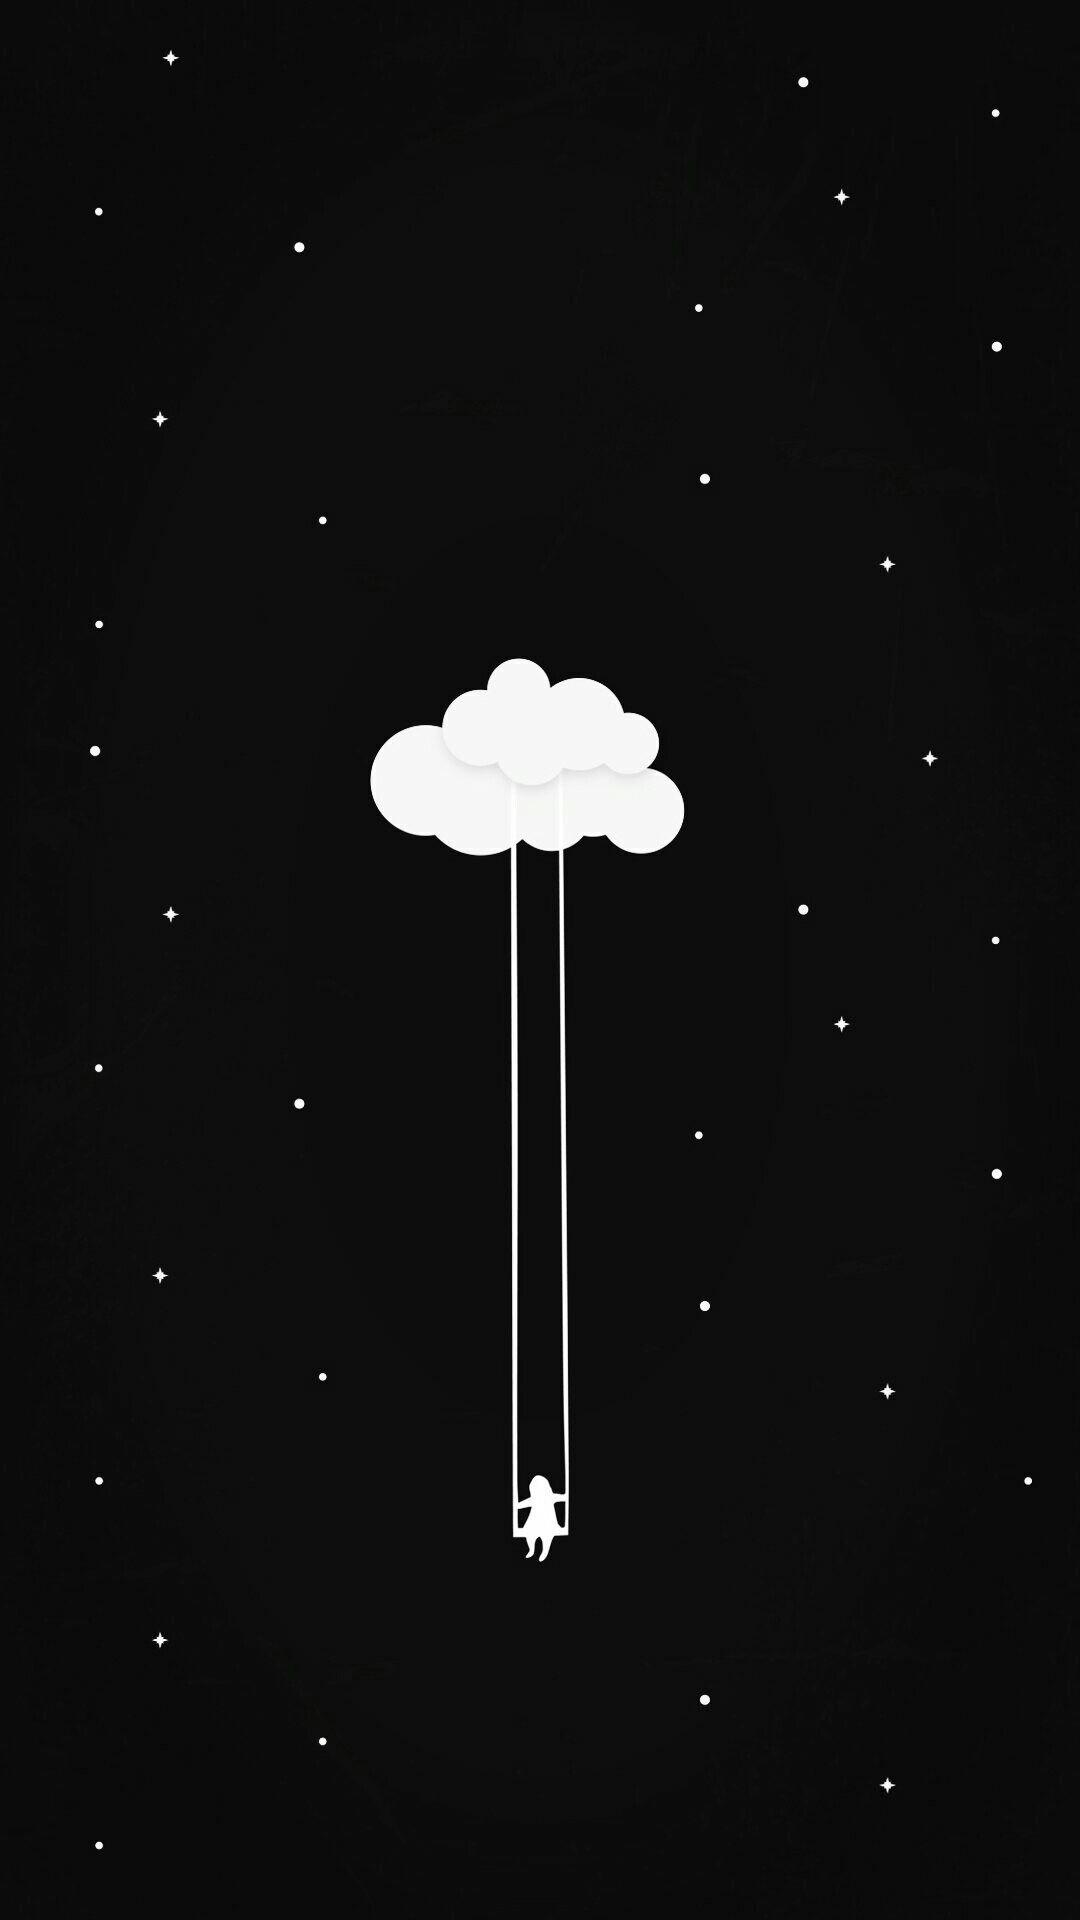 Awesome Cute Black Wallpaper For iPhone HD Cute